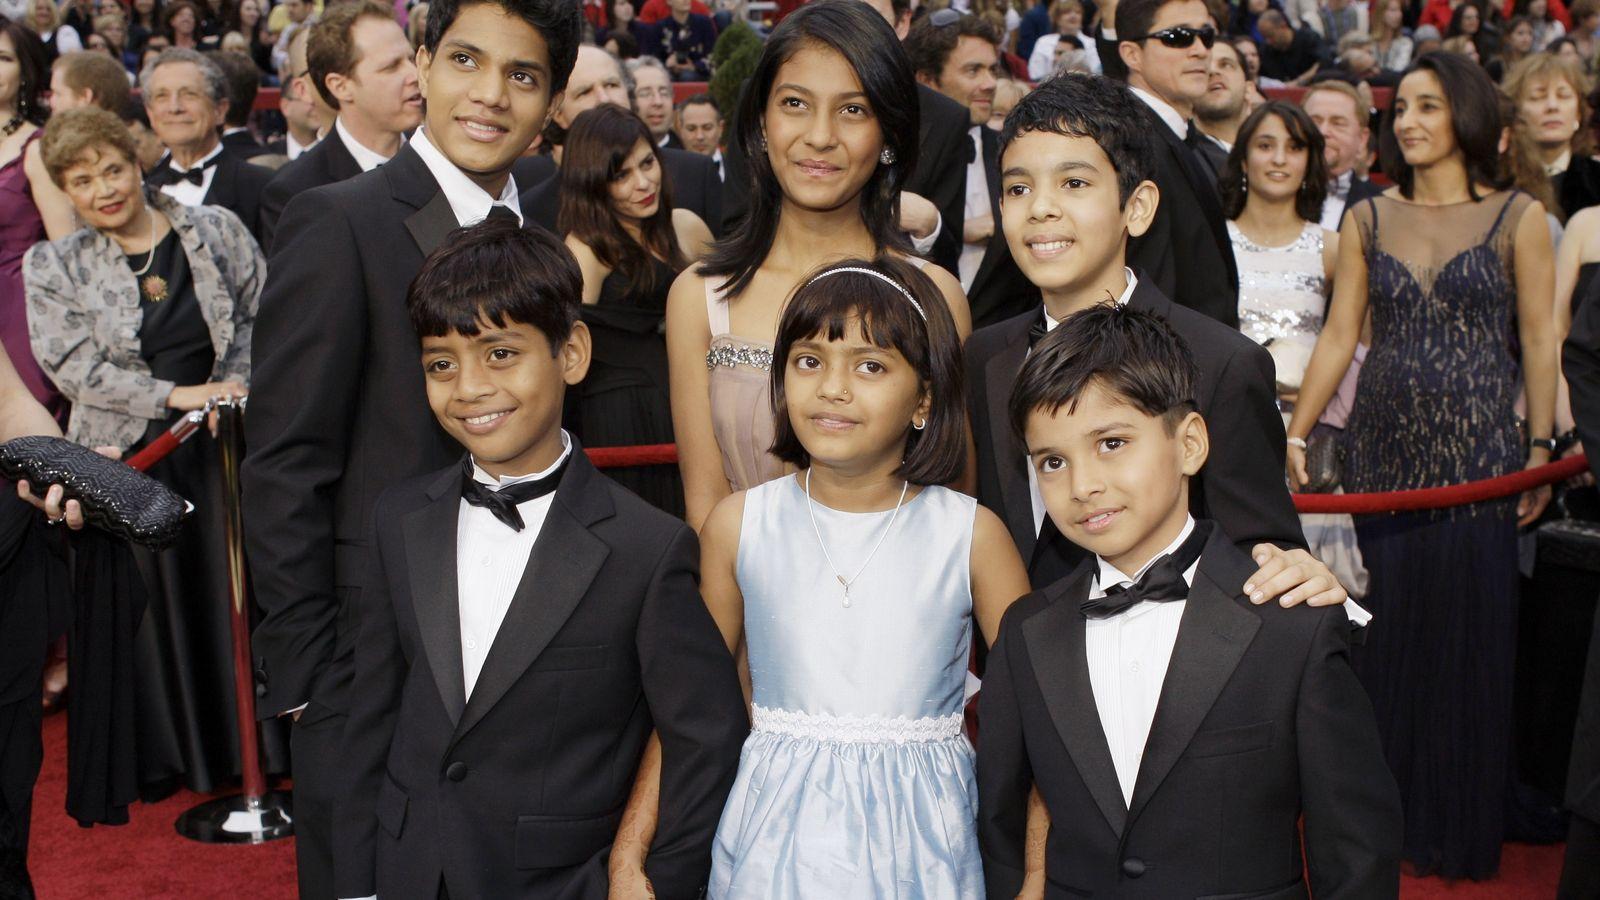 Years Later Here's What the Real 'Slumdog Millionaire' Kids Are Doing